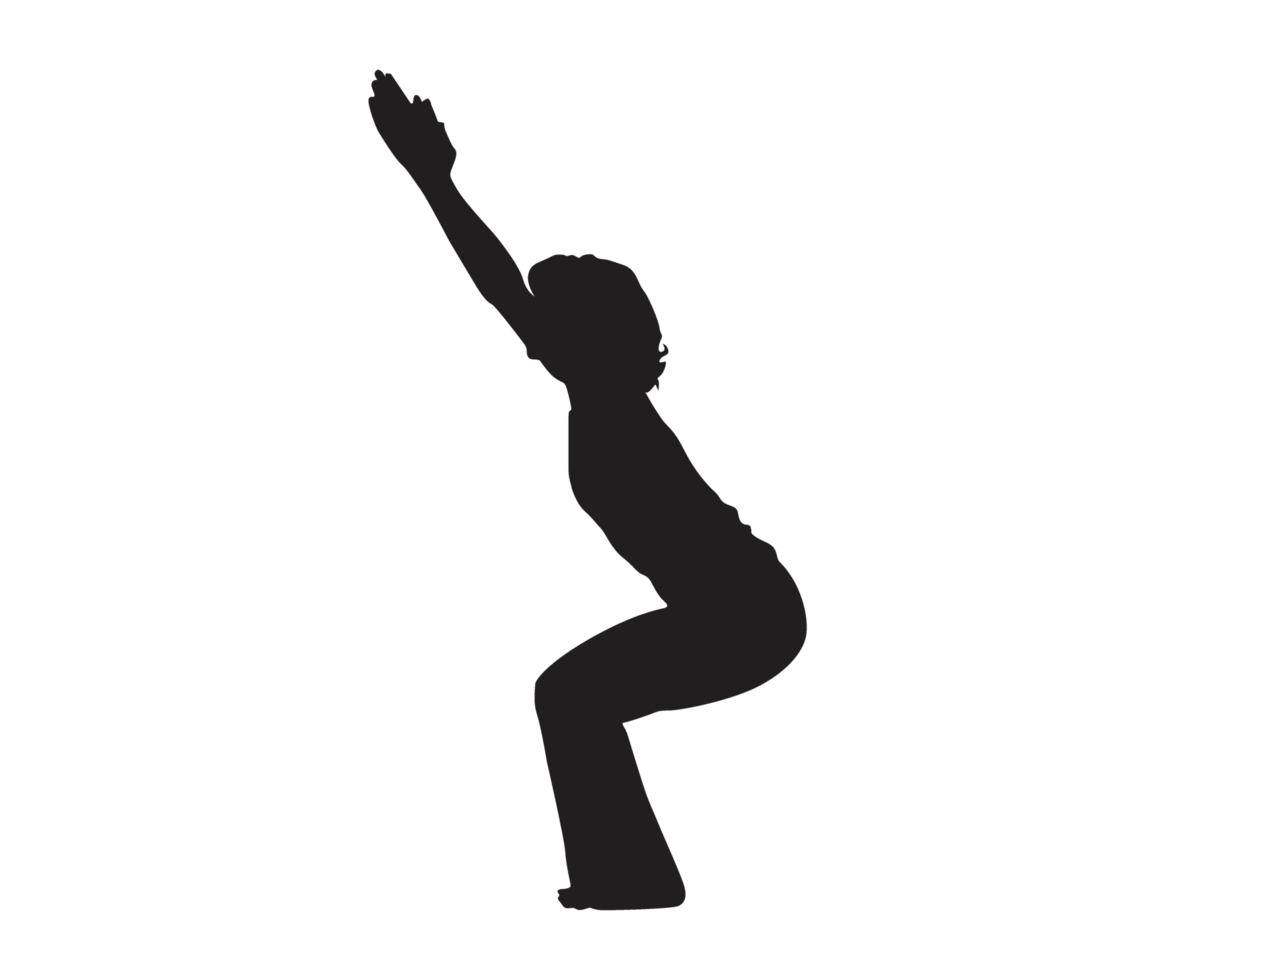 Silhouette Of Woman Doing Yoga Pose png